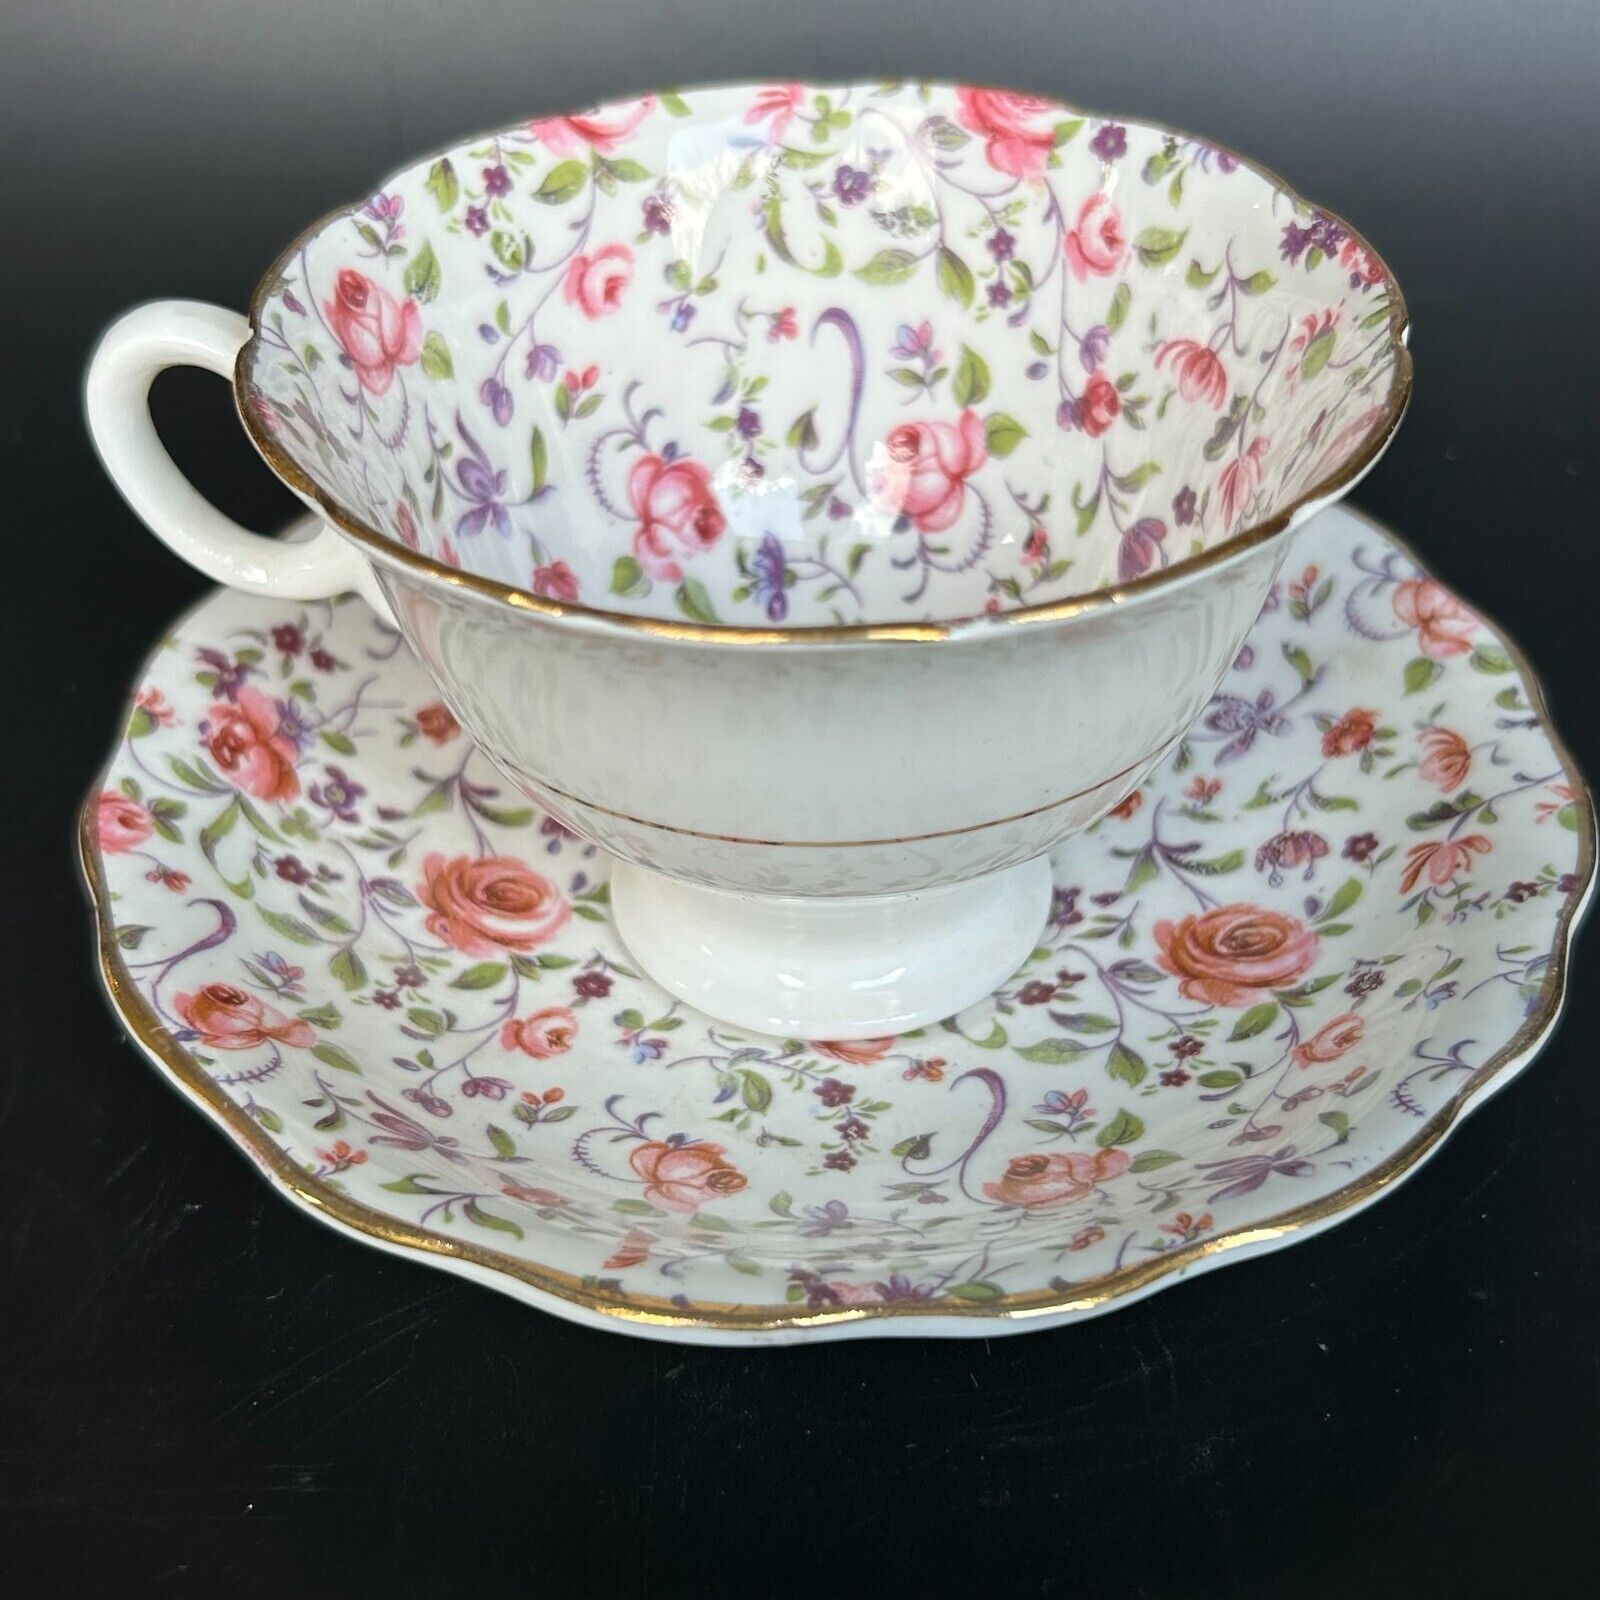 Radfords Bone China Pink Floral Chintz Teacup and Saucer Made In England